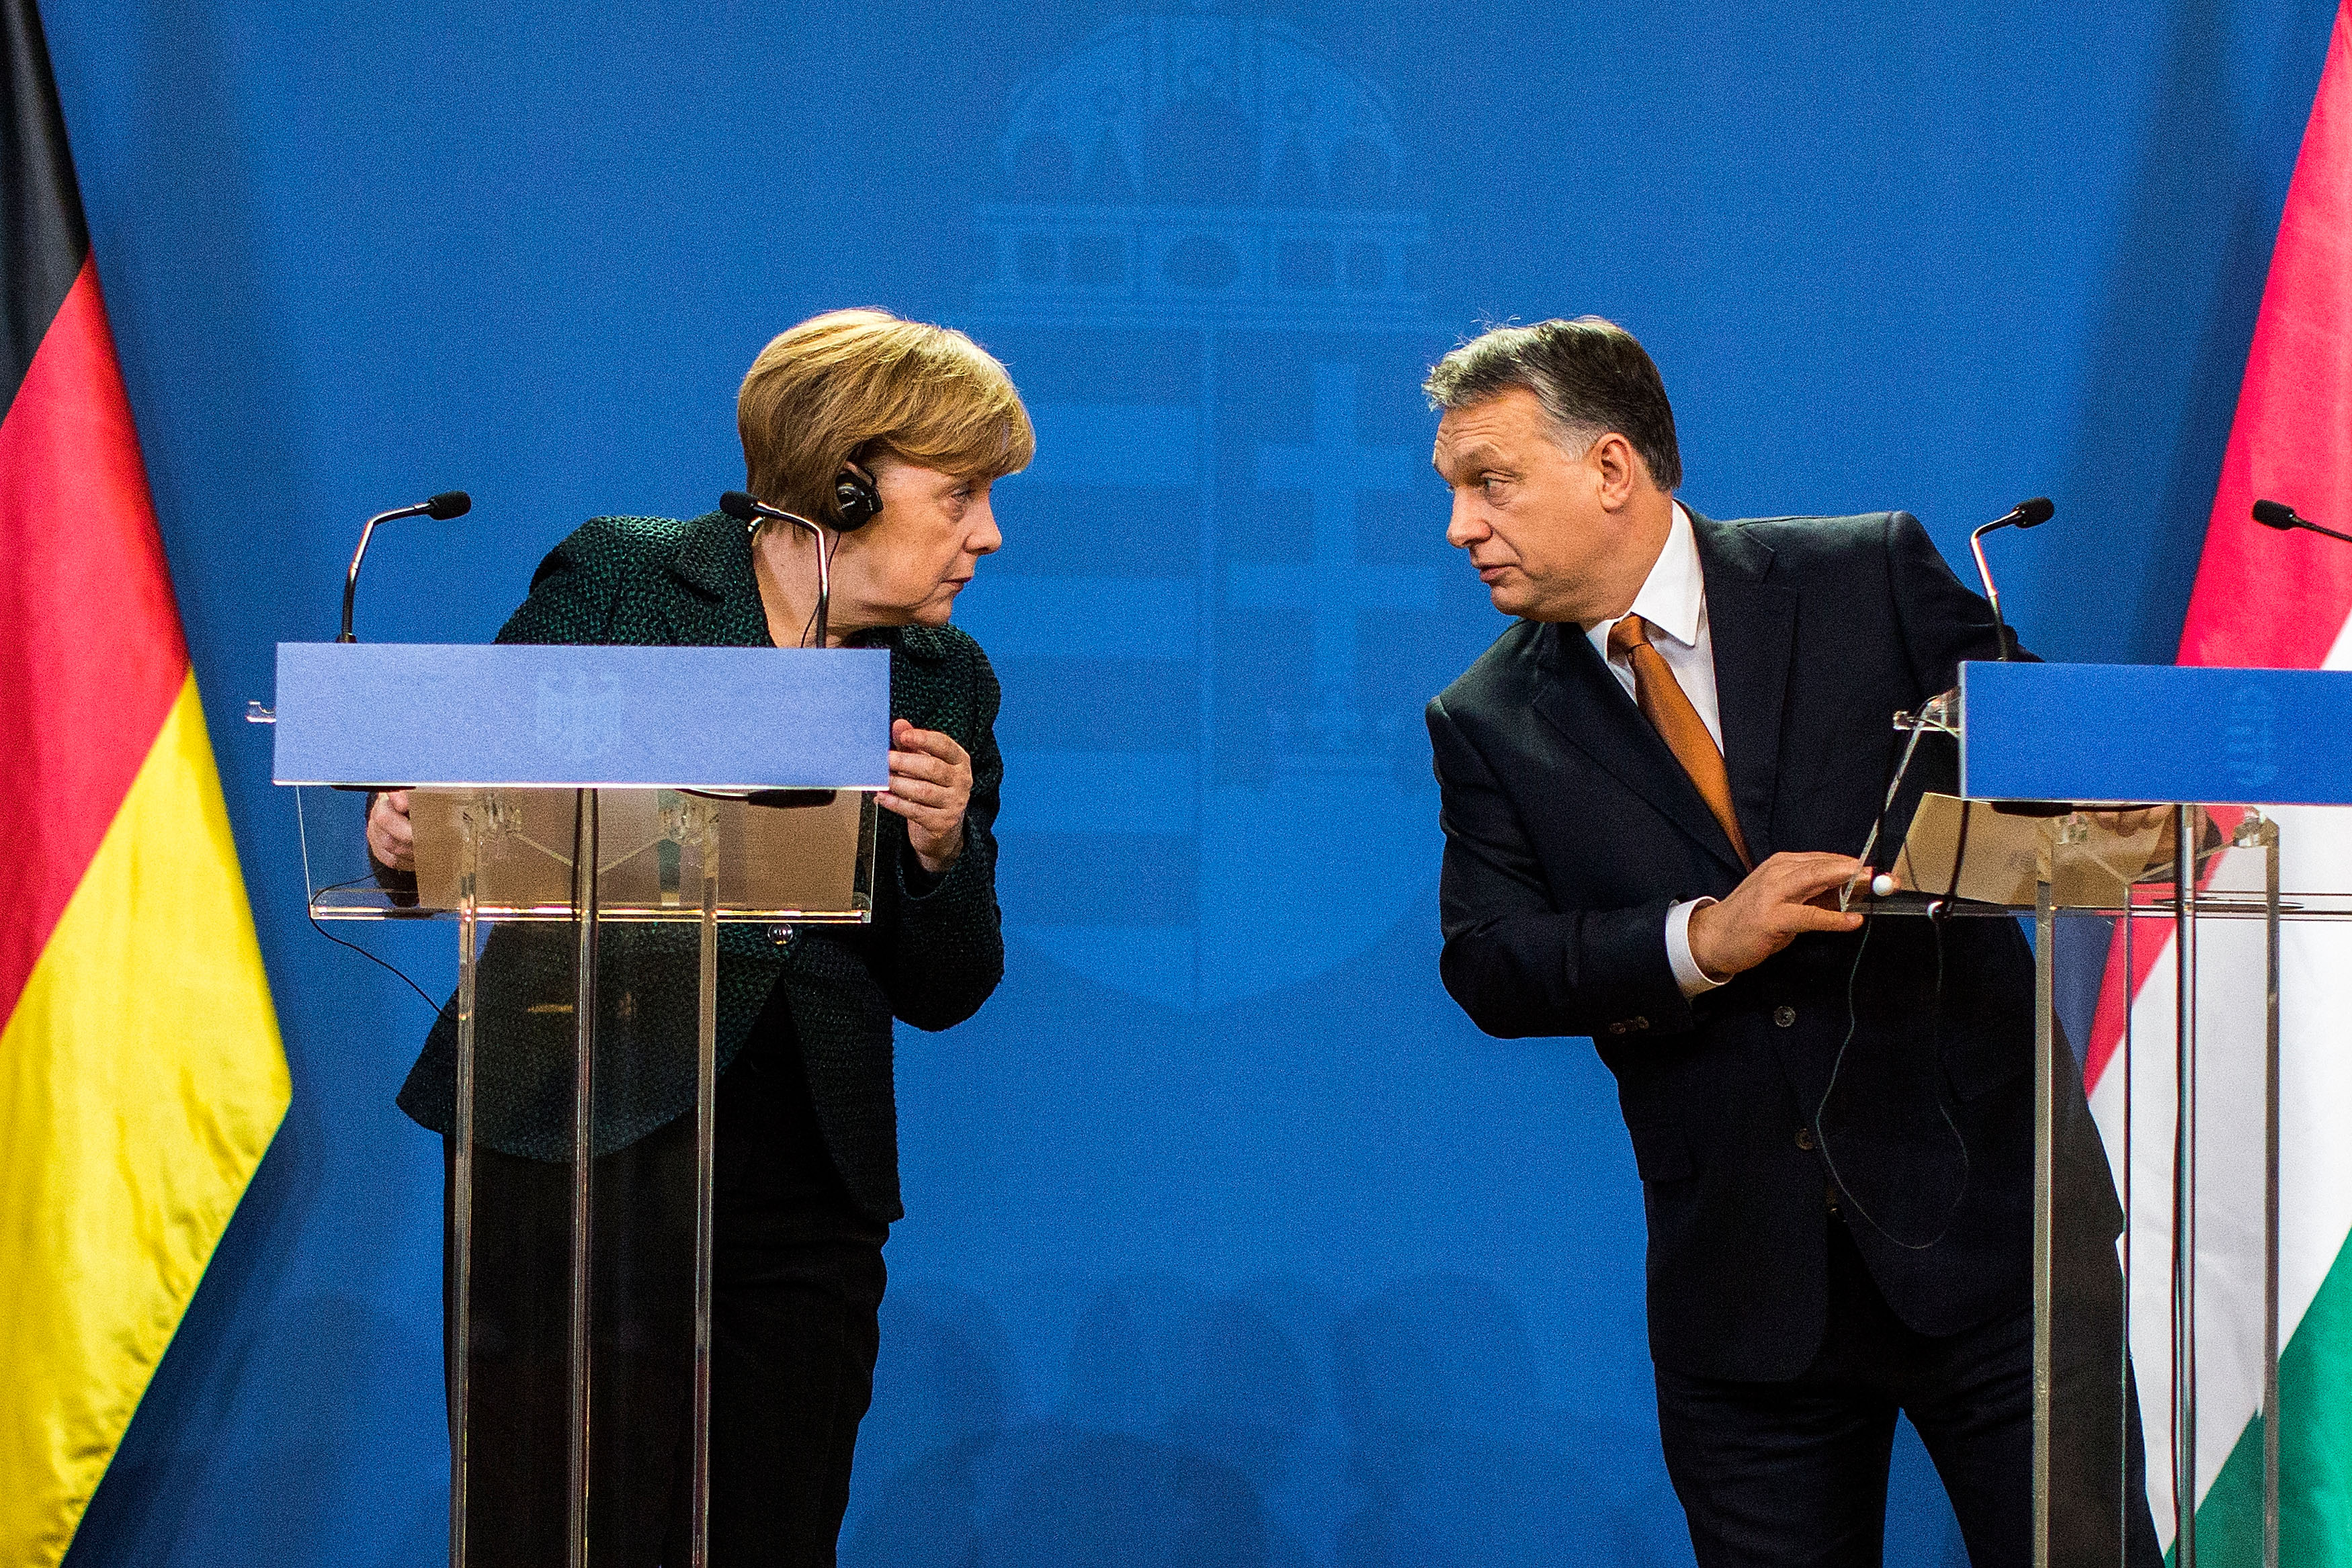 BUDAPEST, HUNGARY - FEBRUARY 02:  German Chancellor Angela Merkel (L) and Hungarian Prime Minister Viktor Orban (R) speak to each other following talks on February 2, 2015 in Budapest, Hungary. Merkel is on a one-day visit to the Hungarian capital in a trip that includes meetings with government leaders, discussions with students at Andrassy University and meetings with local Jewish leaders. Merkel's visit was preceded the day before by demonstrations against the Orban government.  (Photo by Carsten Koall/Getty Images)